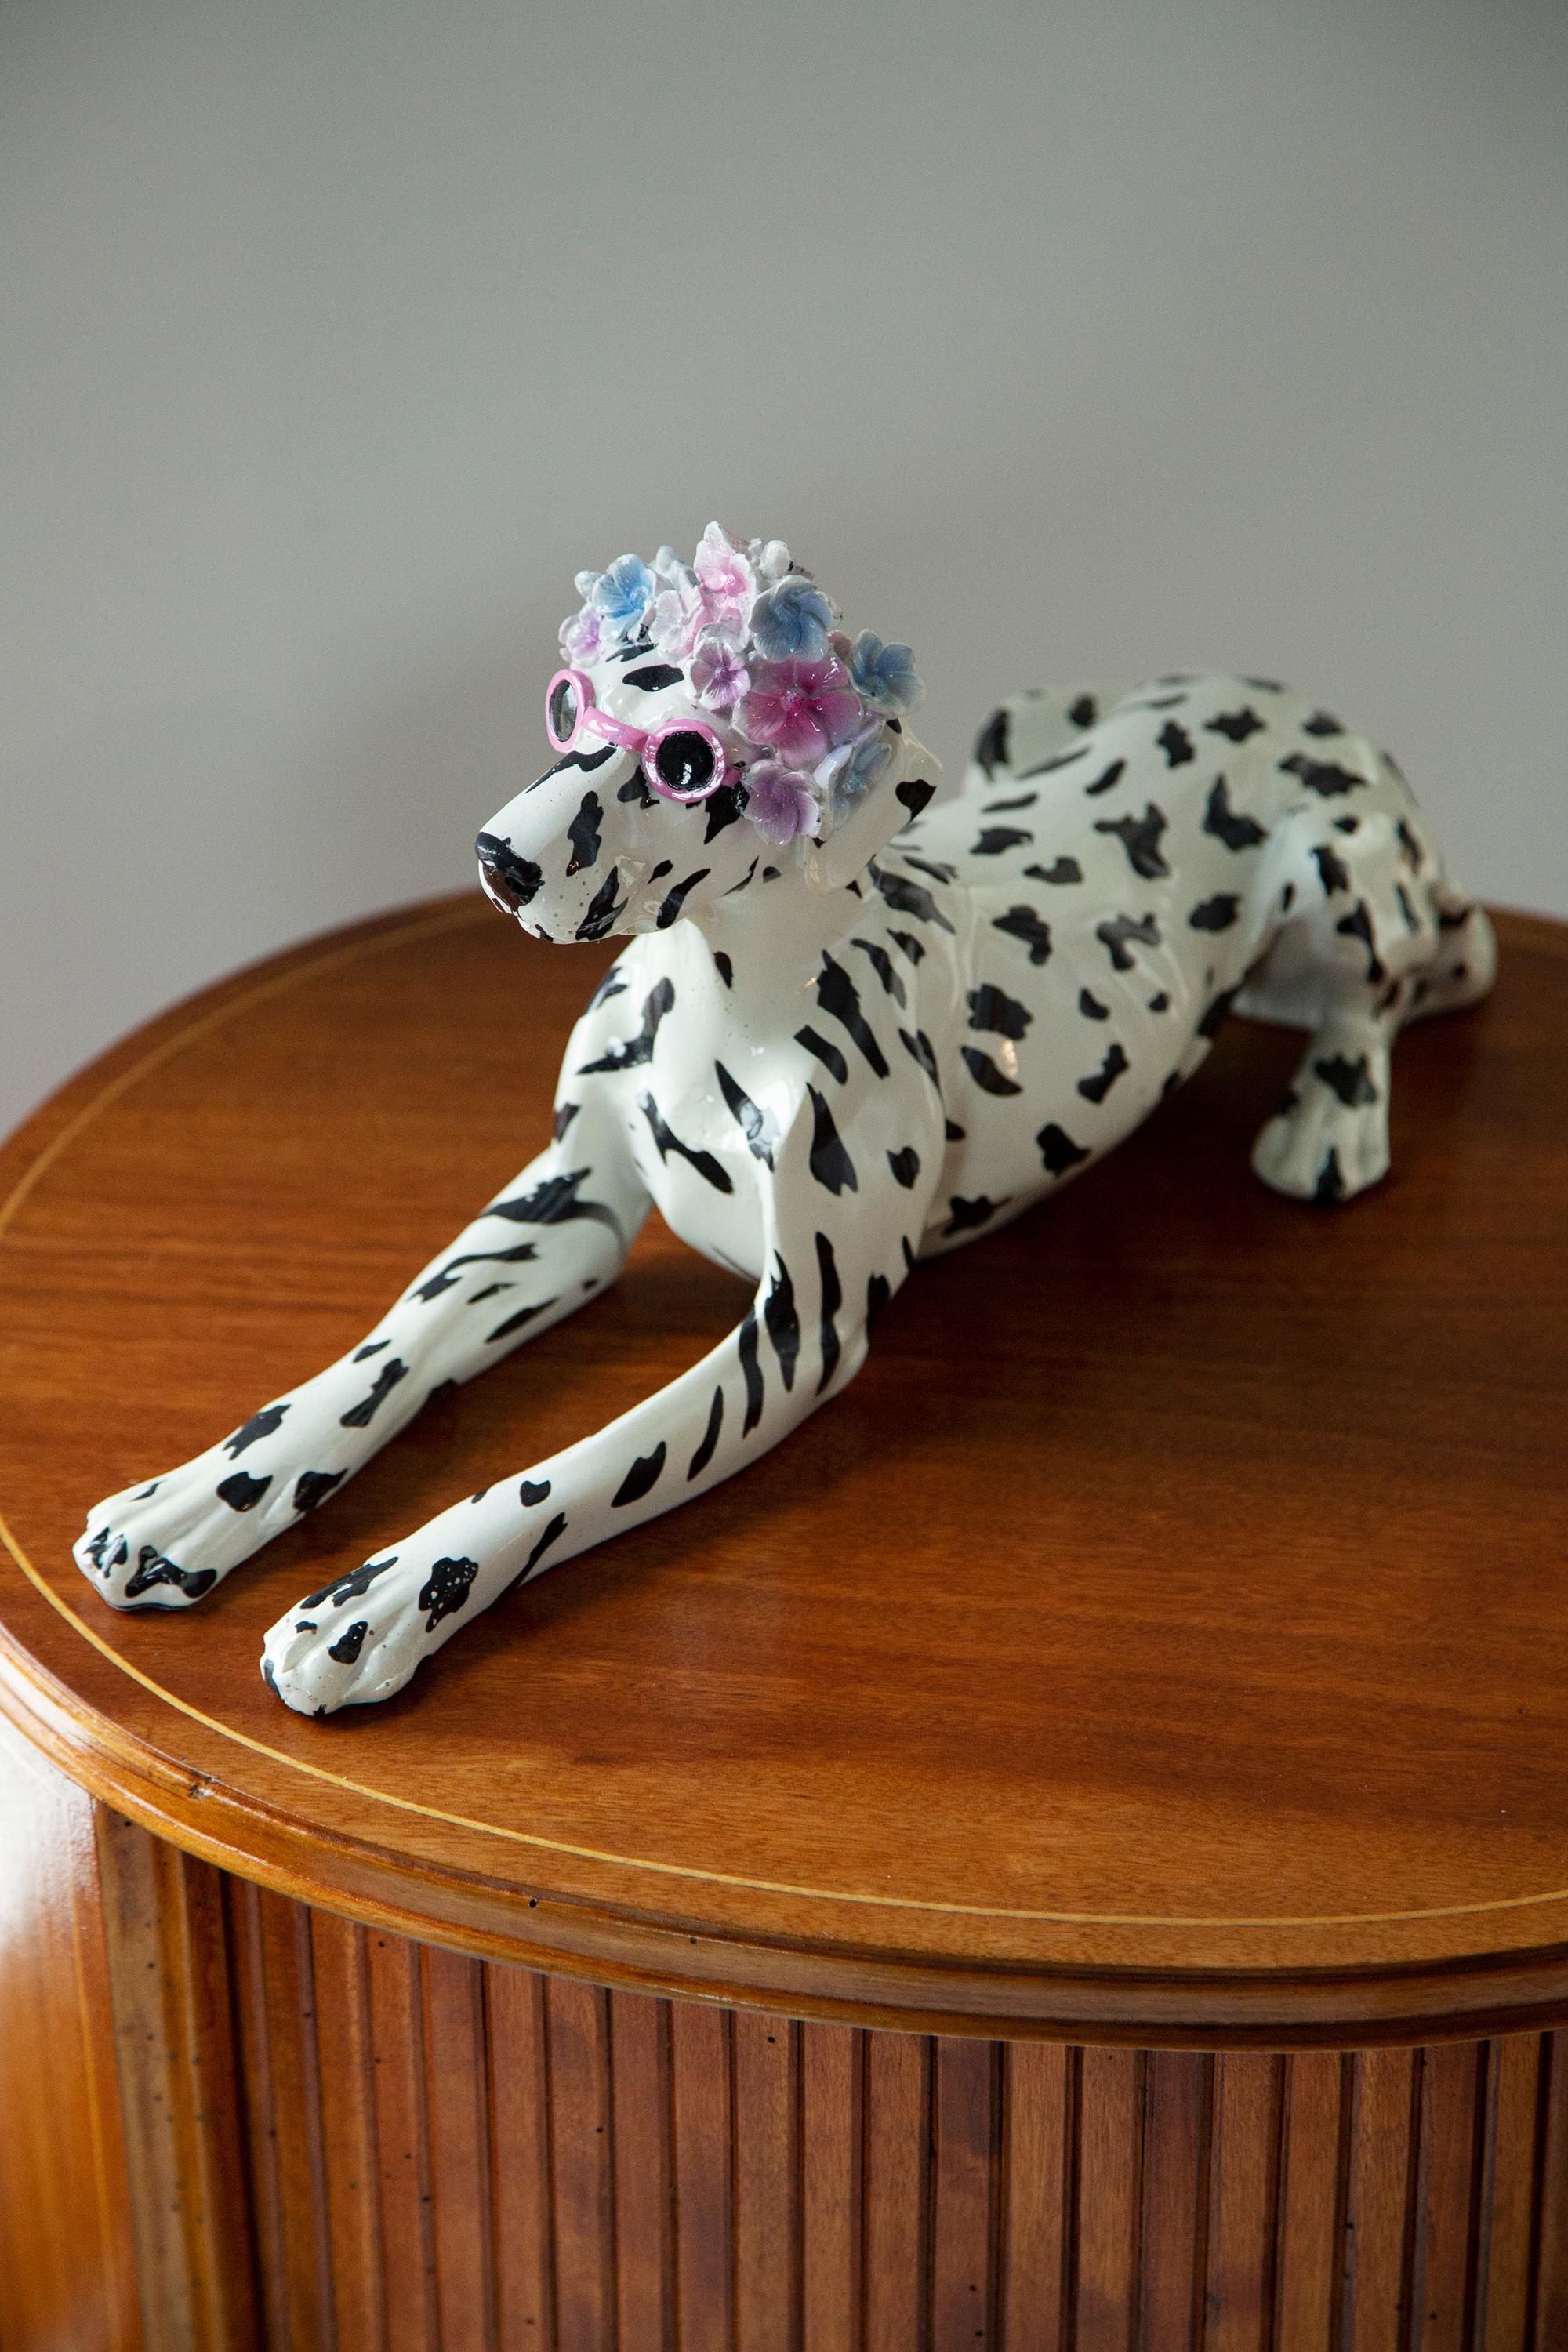 Painted ceramic, very good original vintage condition. No damages or cracks. Beautiful and unique decorative sculpture. Dalmatian Dog Sculpture was produced in Italy. Only one dog available.